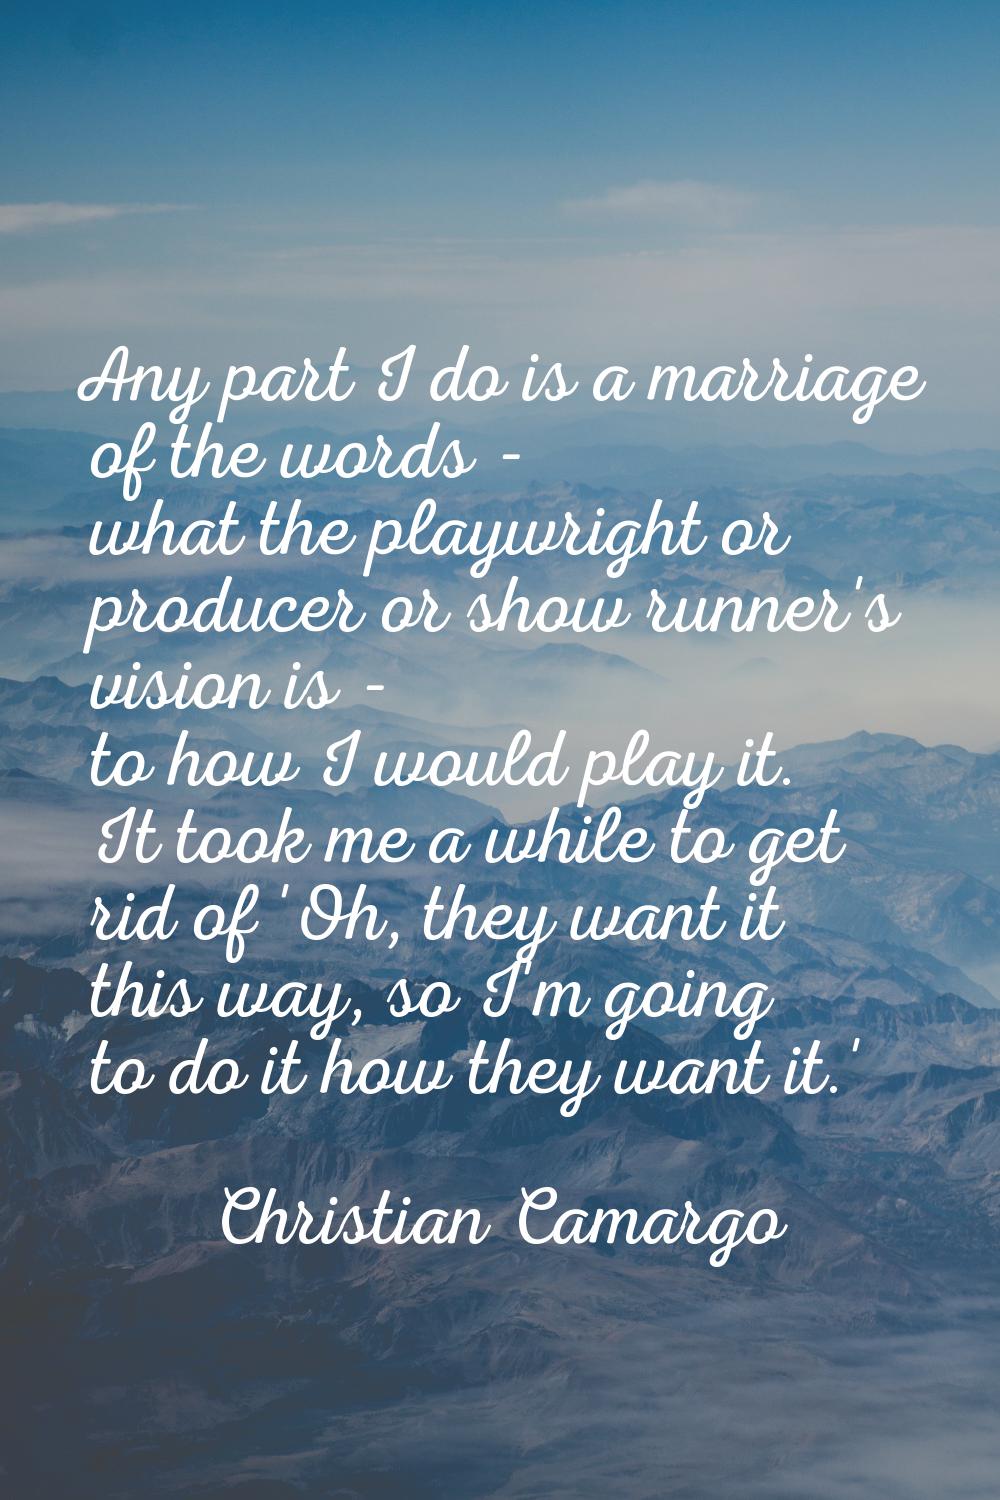 Any part I do is a marriage of the words - what the playwright or producer or show runner's vision 